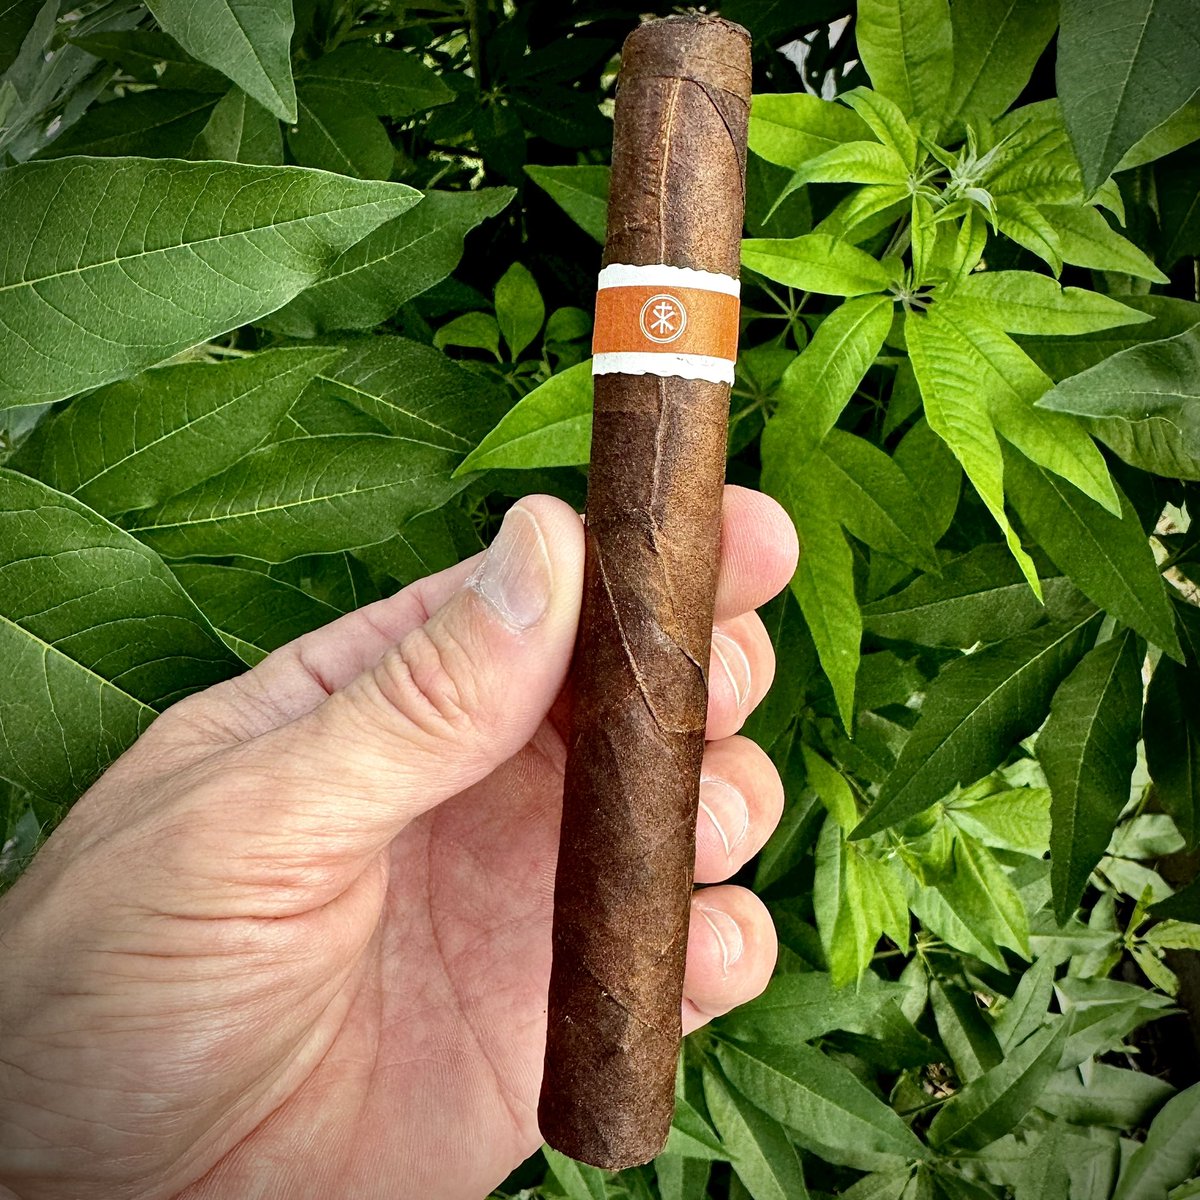 Some days, you just need to come home to your favorite cigar. I was too impatient to open another box of Neanderthal SGP so a @SmokeRoMA Neanderthal HS will pinch hit.